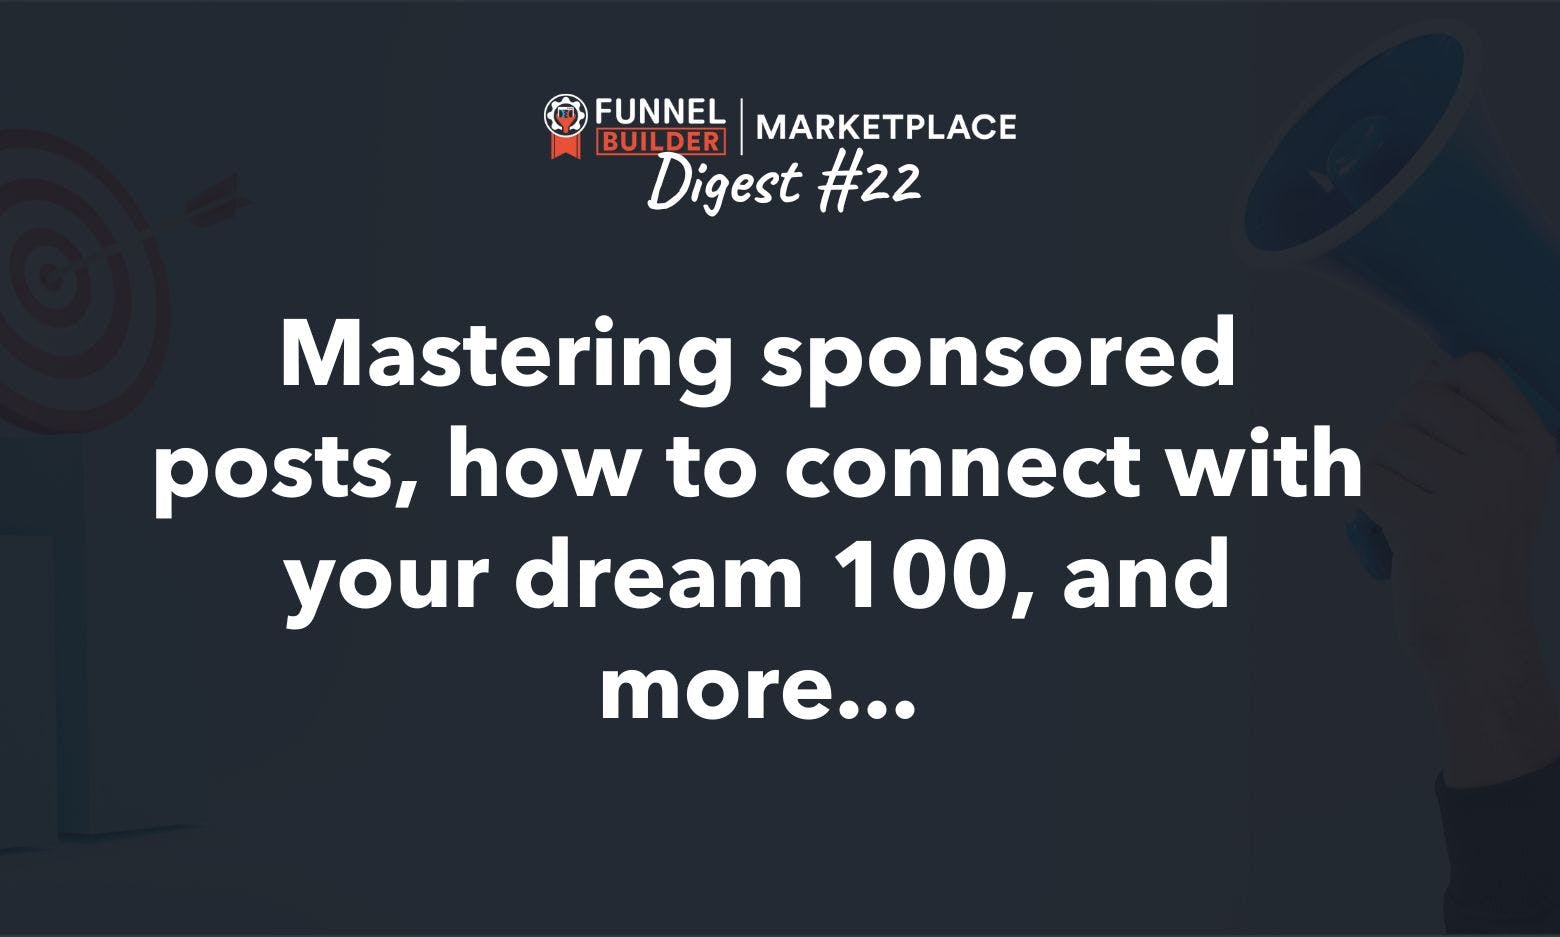 FBM Digest #22: Mastering sponsored posts, how to connect with your dream 100, and more...